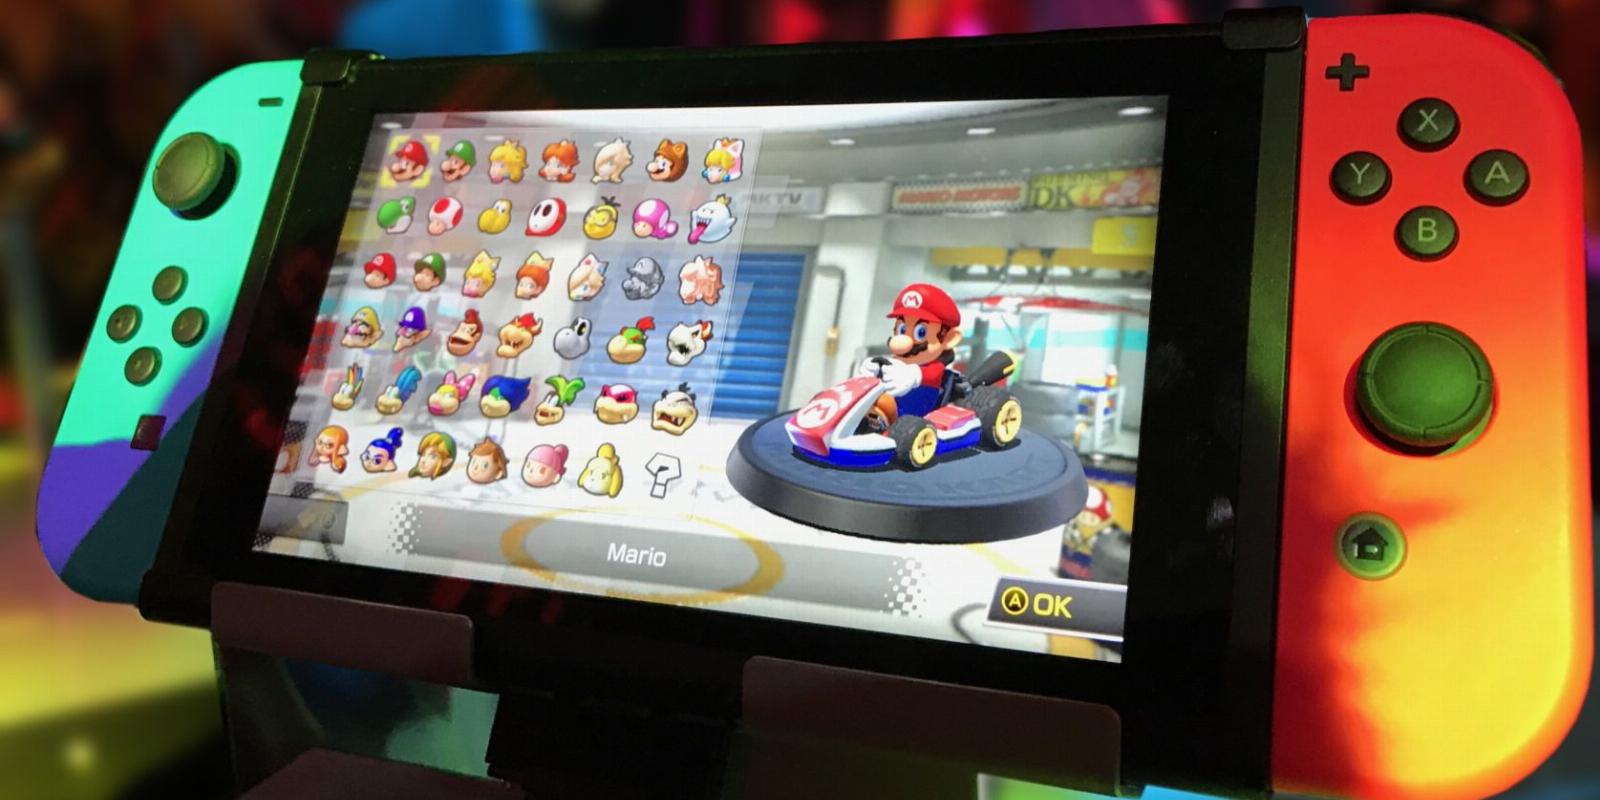 Yes, You Can Connect Nintendo Switch to a TV Without the Dock – Here’s How